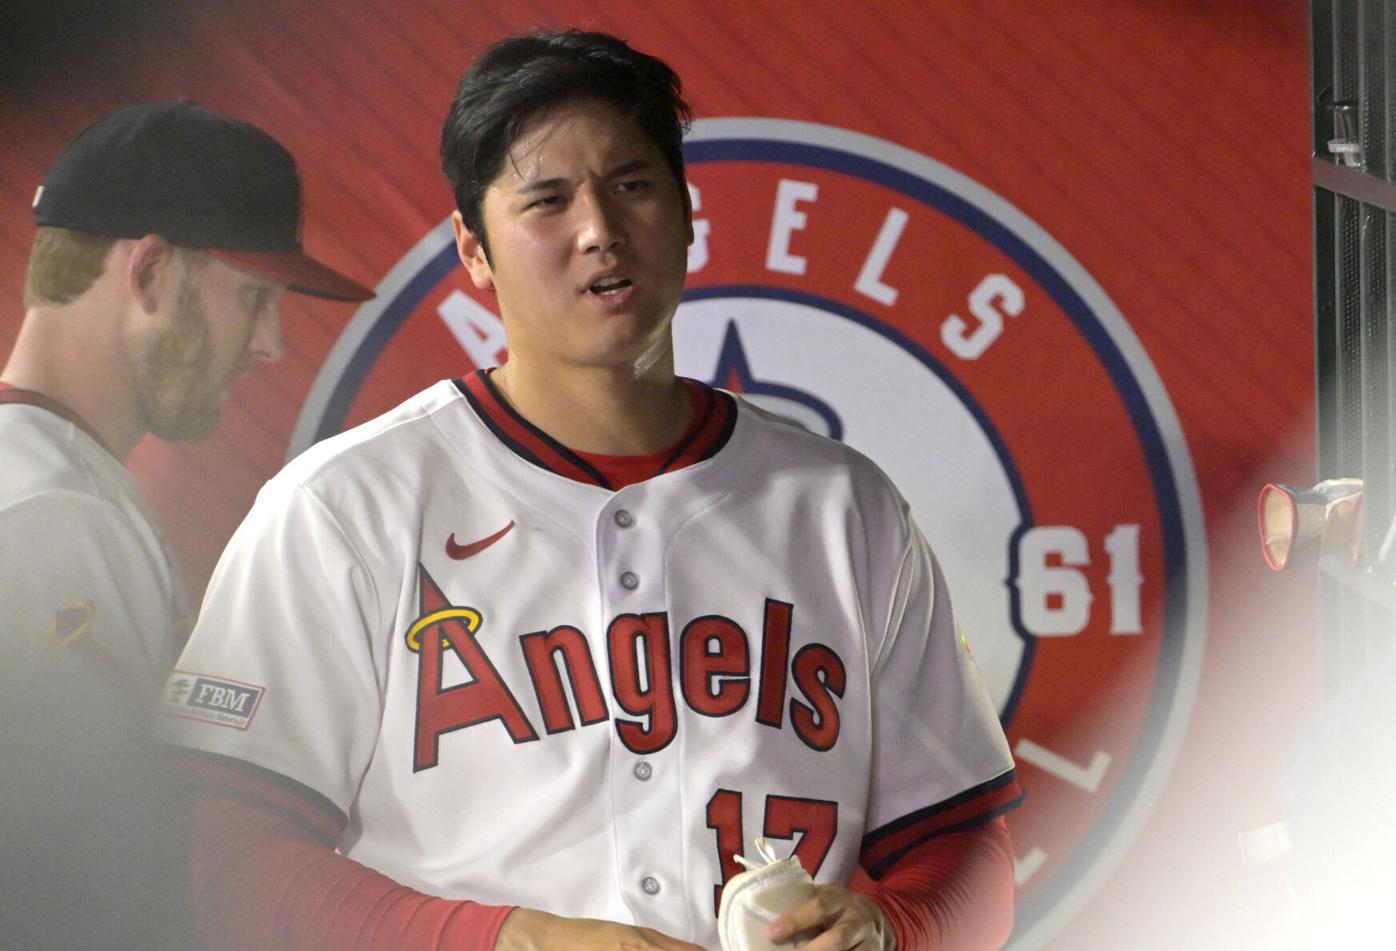 MLB Notebook: Red Sox not a trade fit for Ohtani, but free agency looms, Red Sox